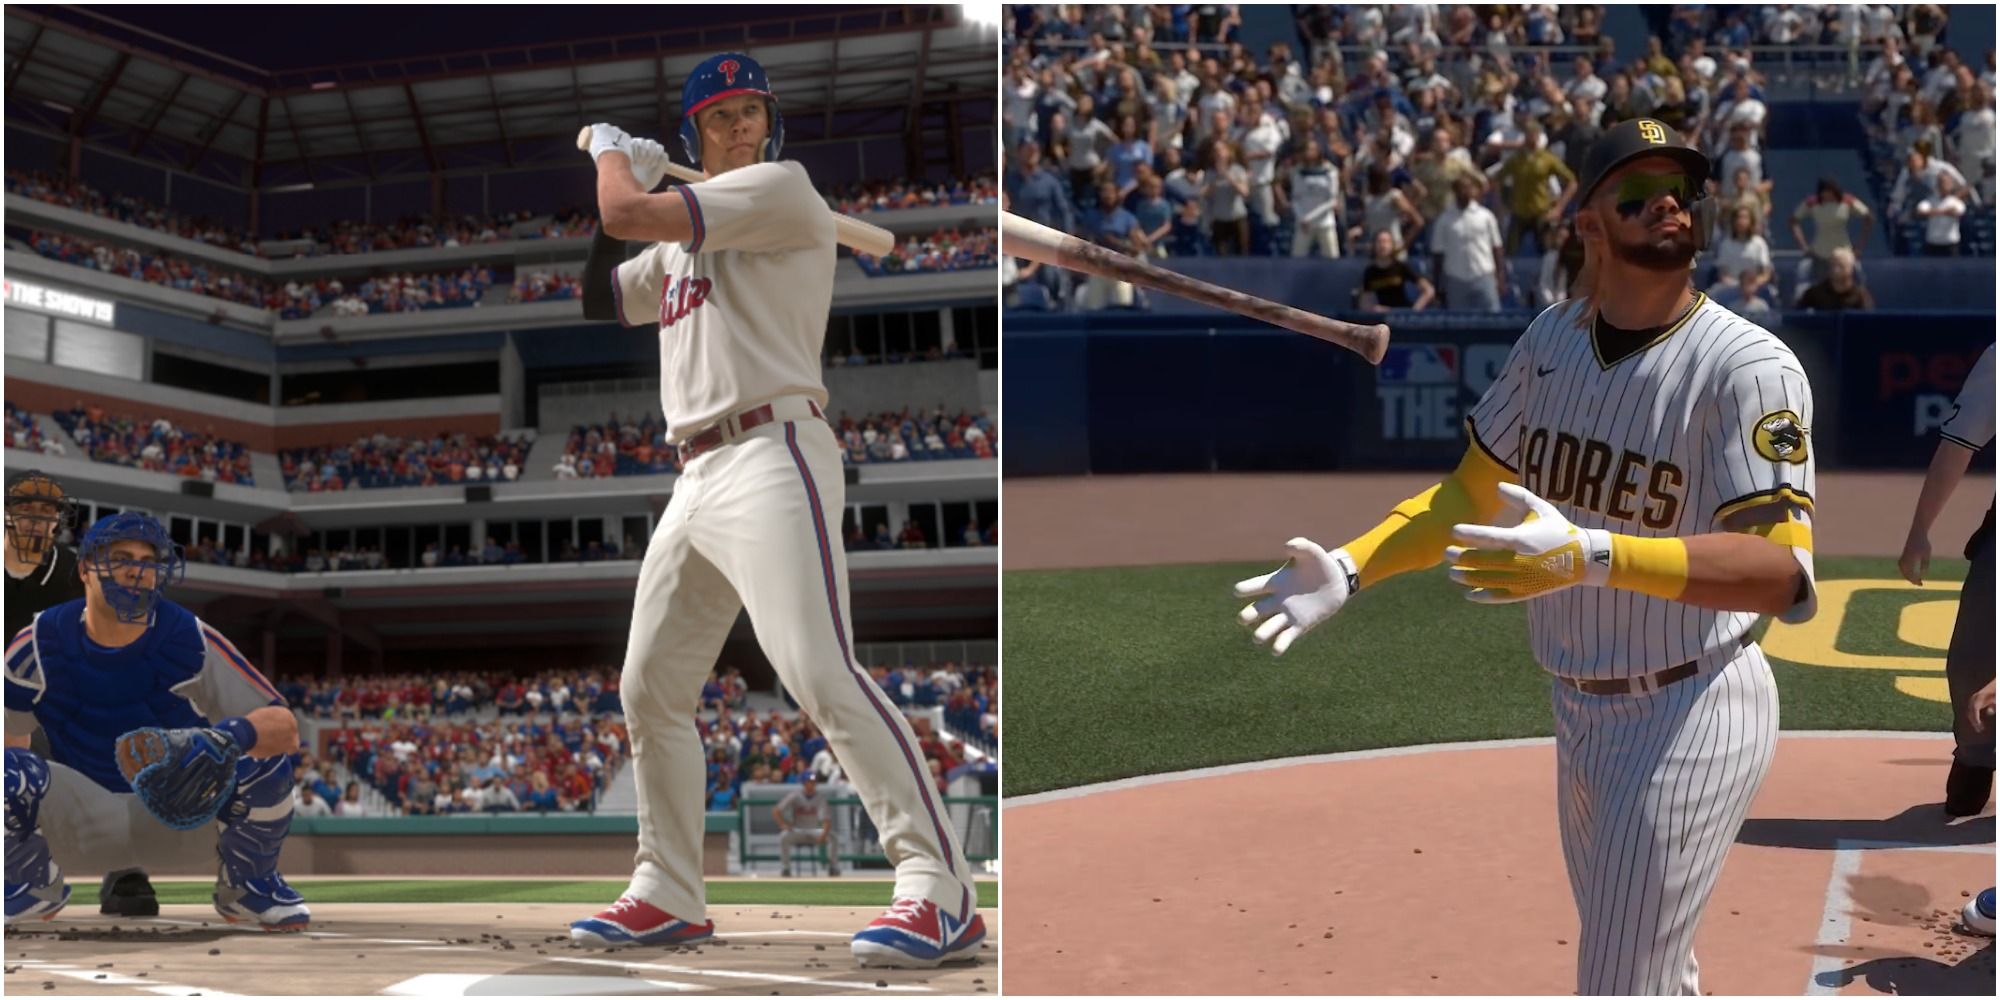 Top Ten Tuesday: Teams To Use In 'MLB The Show 21' Franchise Mode